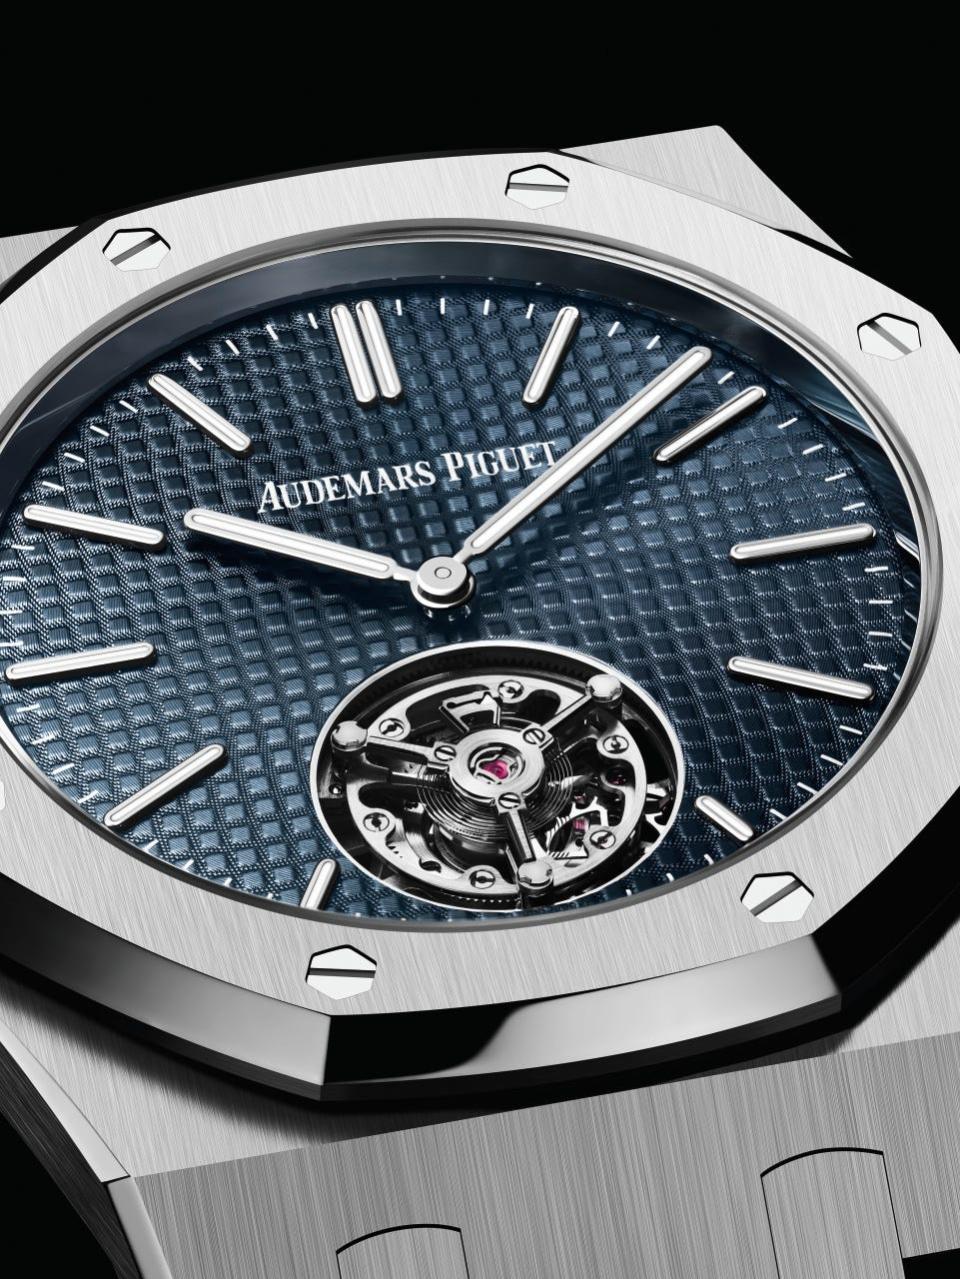 zoom-in on the face of the Audemars Piguet 50th anniversary Royal Oak watch